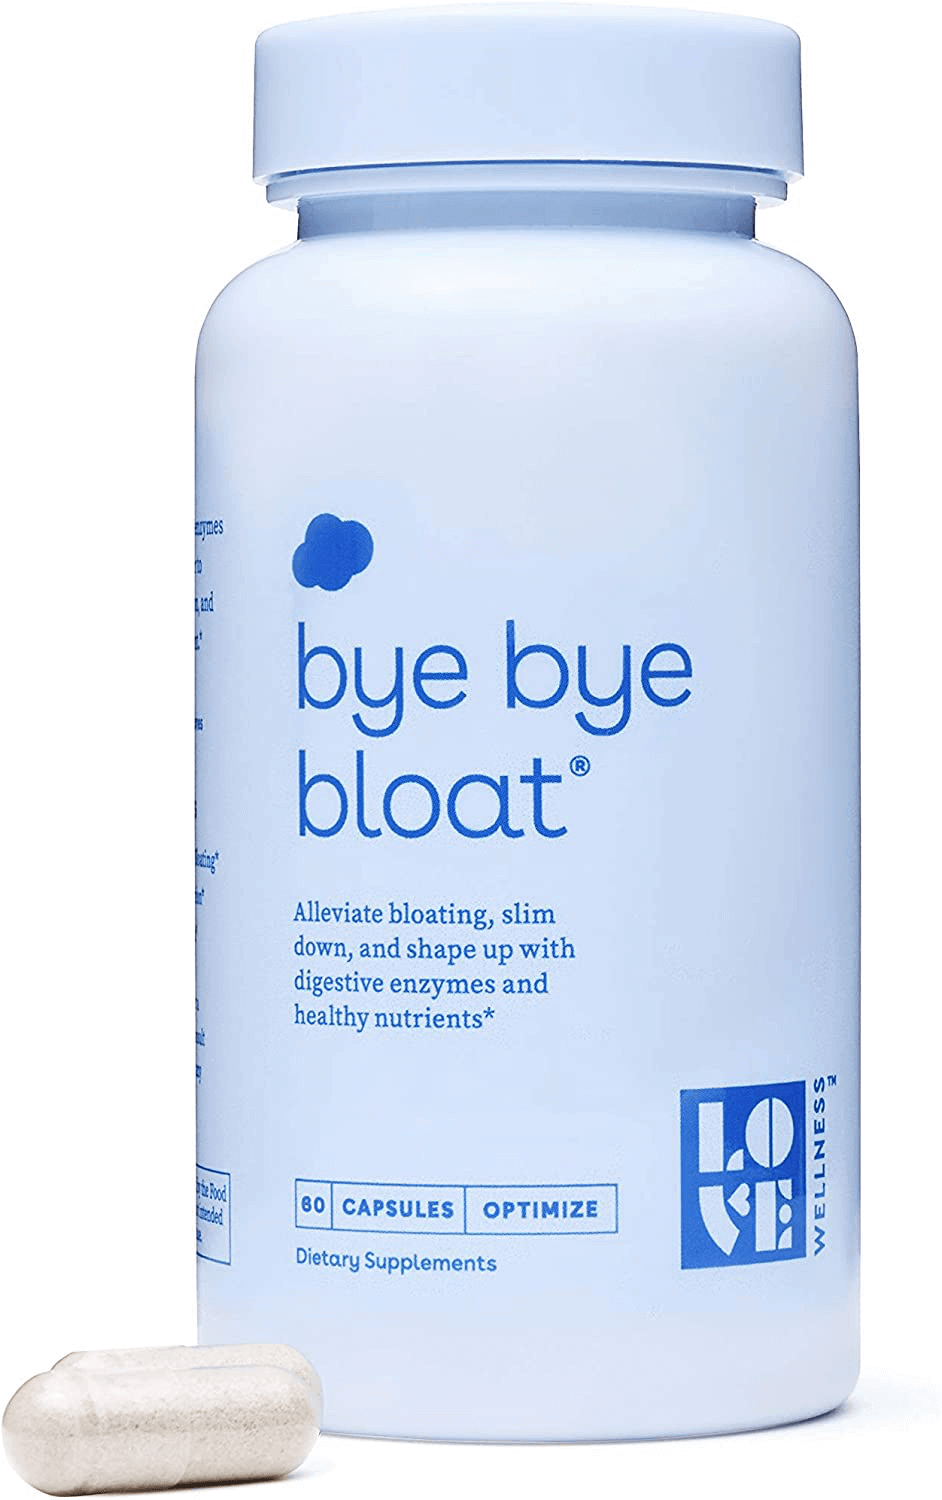 Love Wellness Bye, Bye, Bloat - Digestive Enzymes Supplement - 30 Day Supply - Bloating Relief - Gas Relief - Helps Reduce Water Retention - Helps Your Overall Digestive Health - Safe & Effective - vitamenstore.com